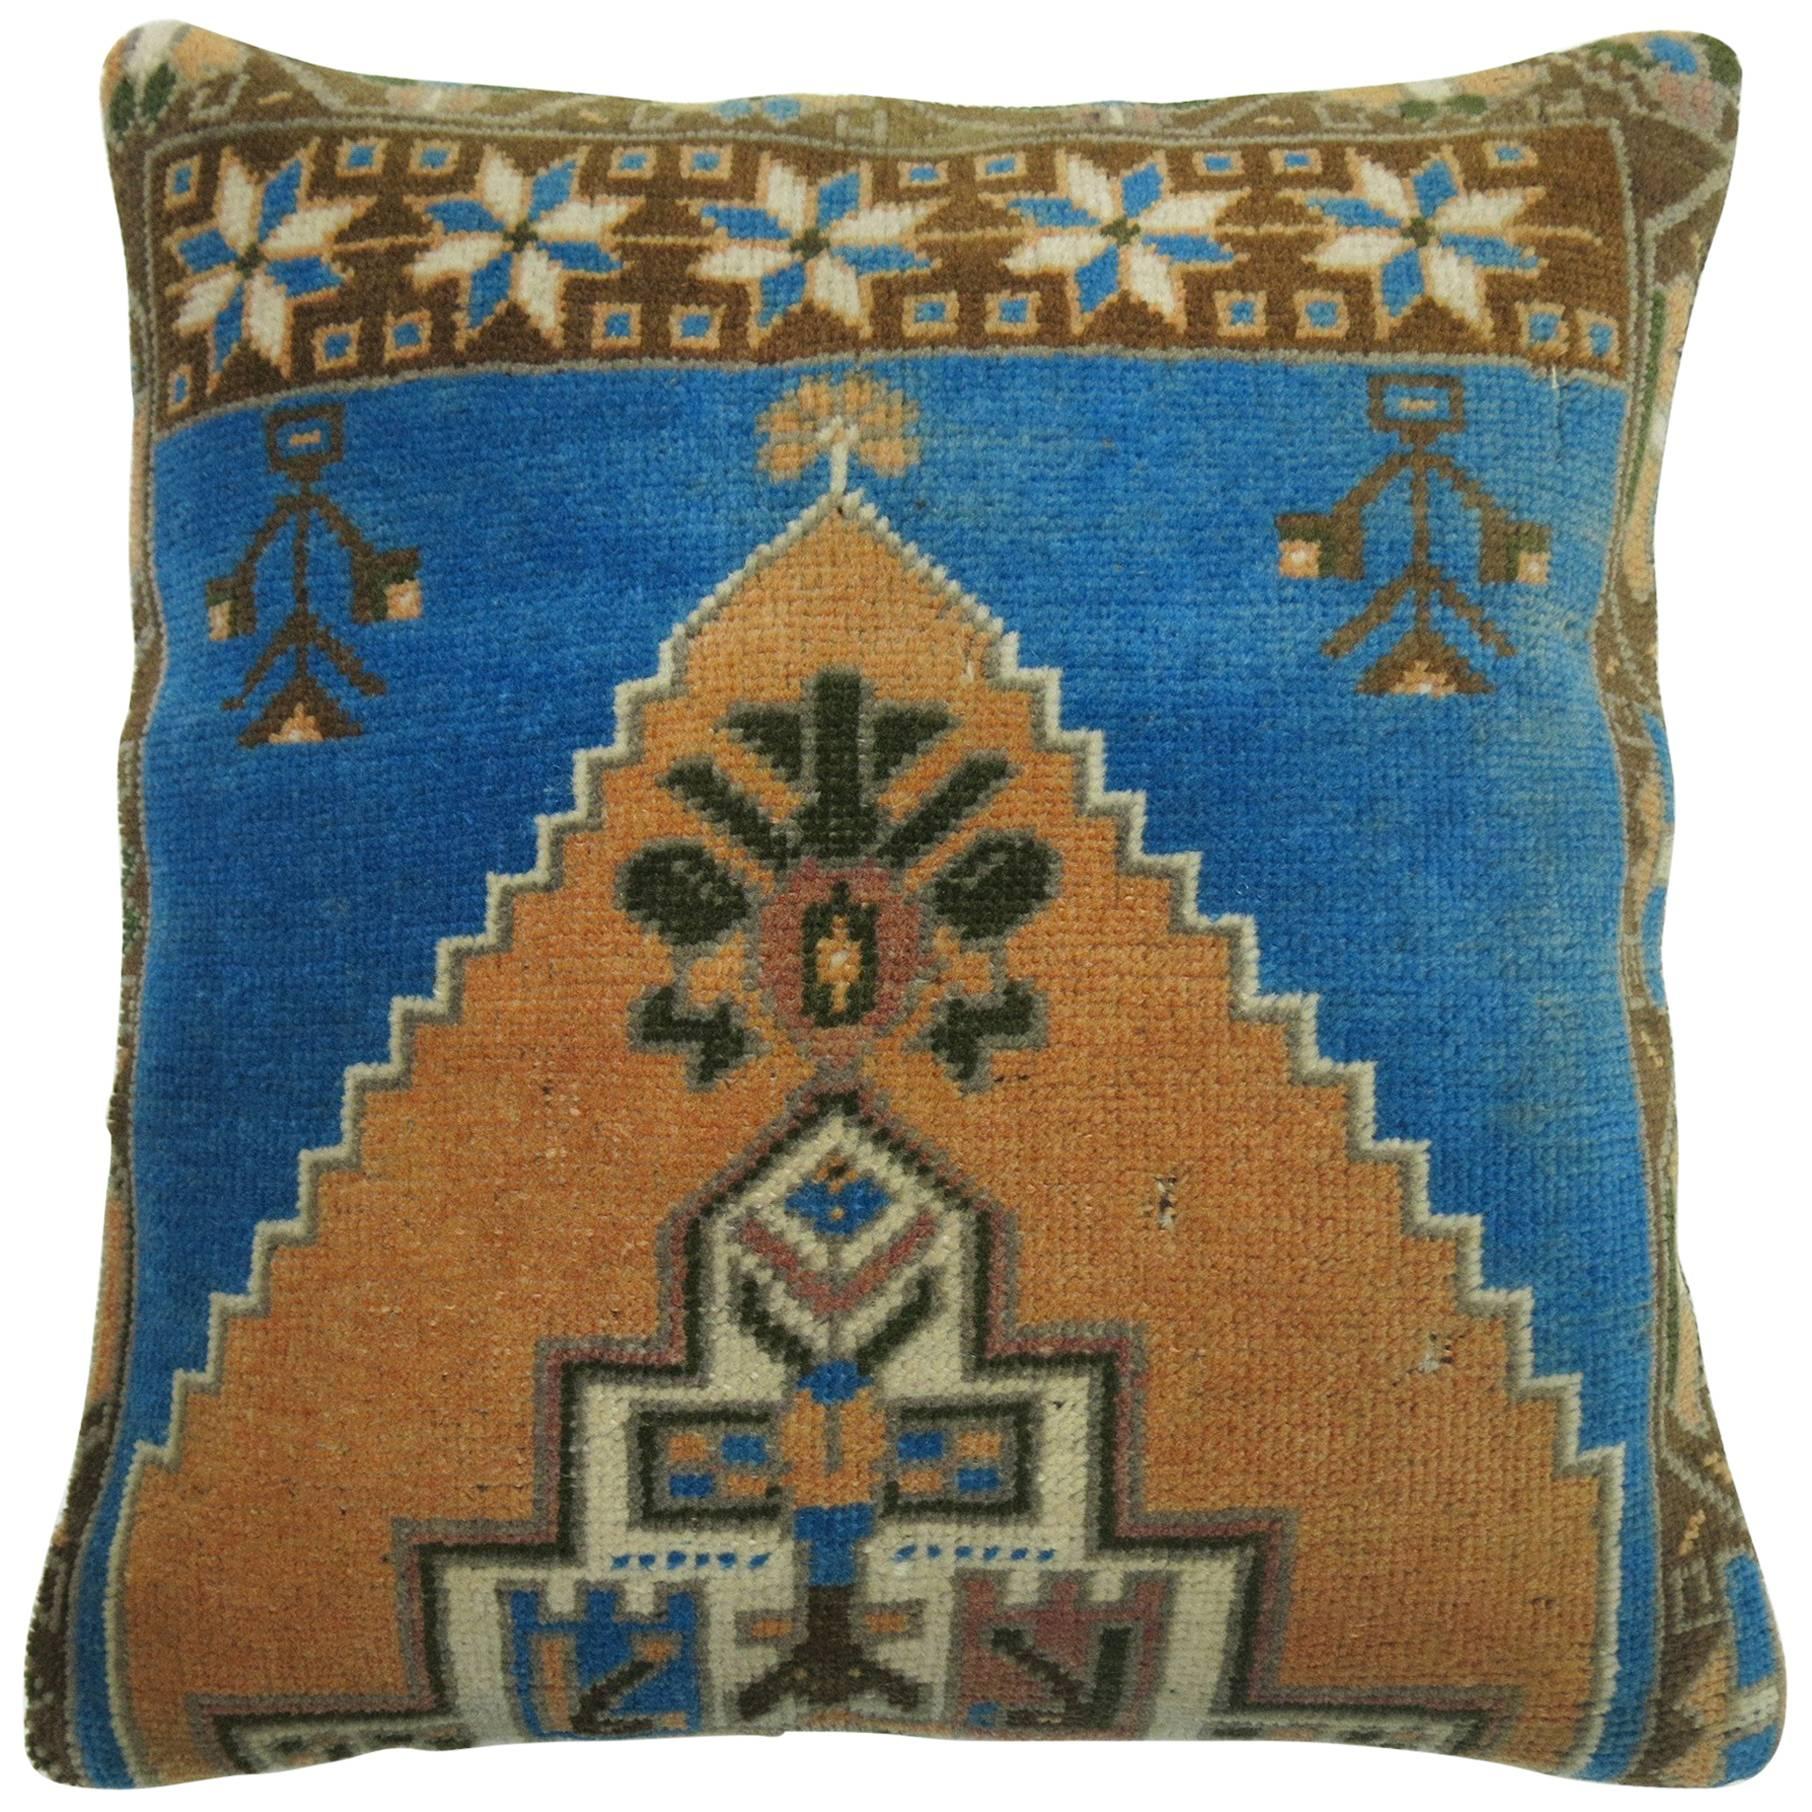 Pillow from a Turkish Rug